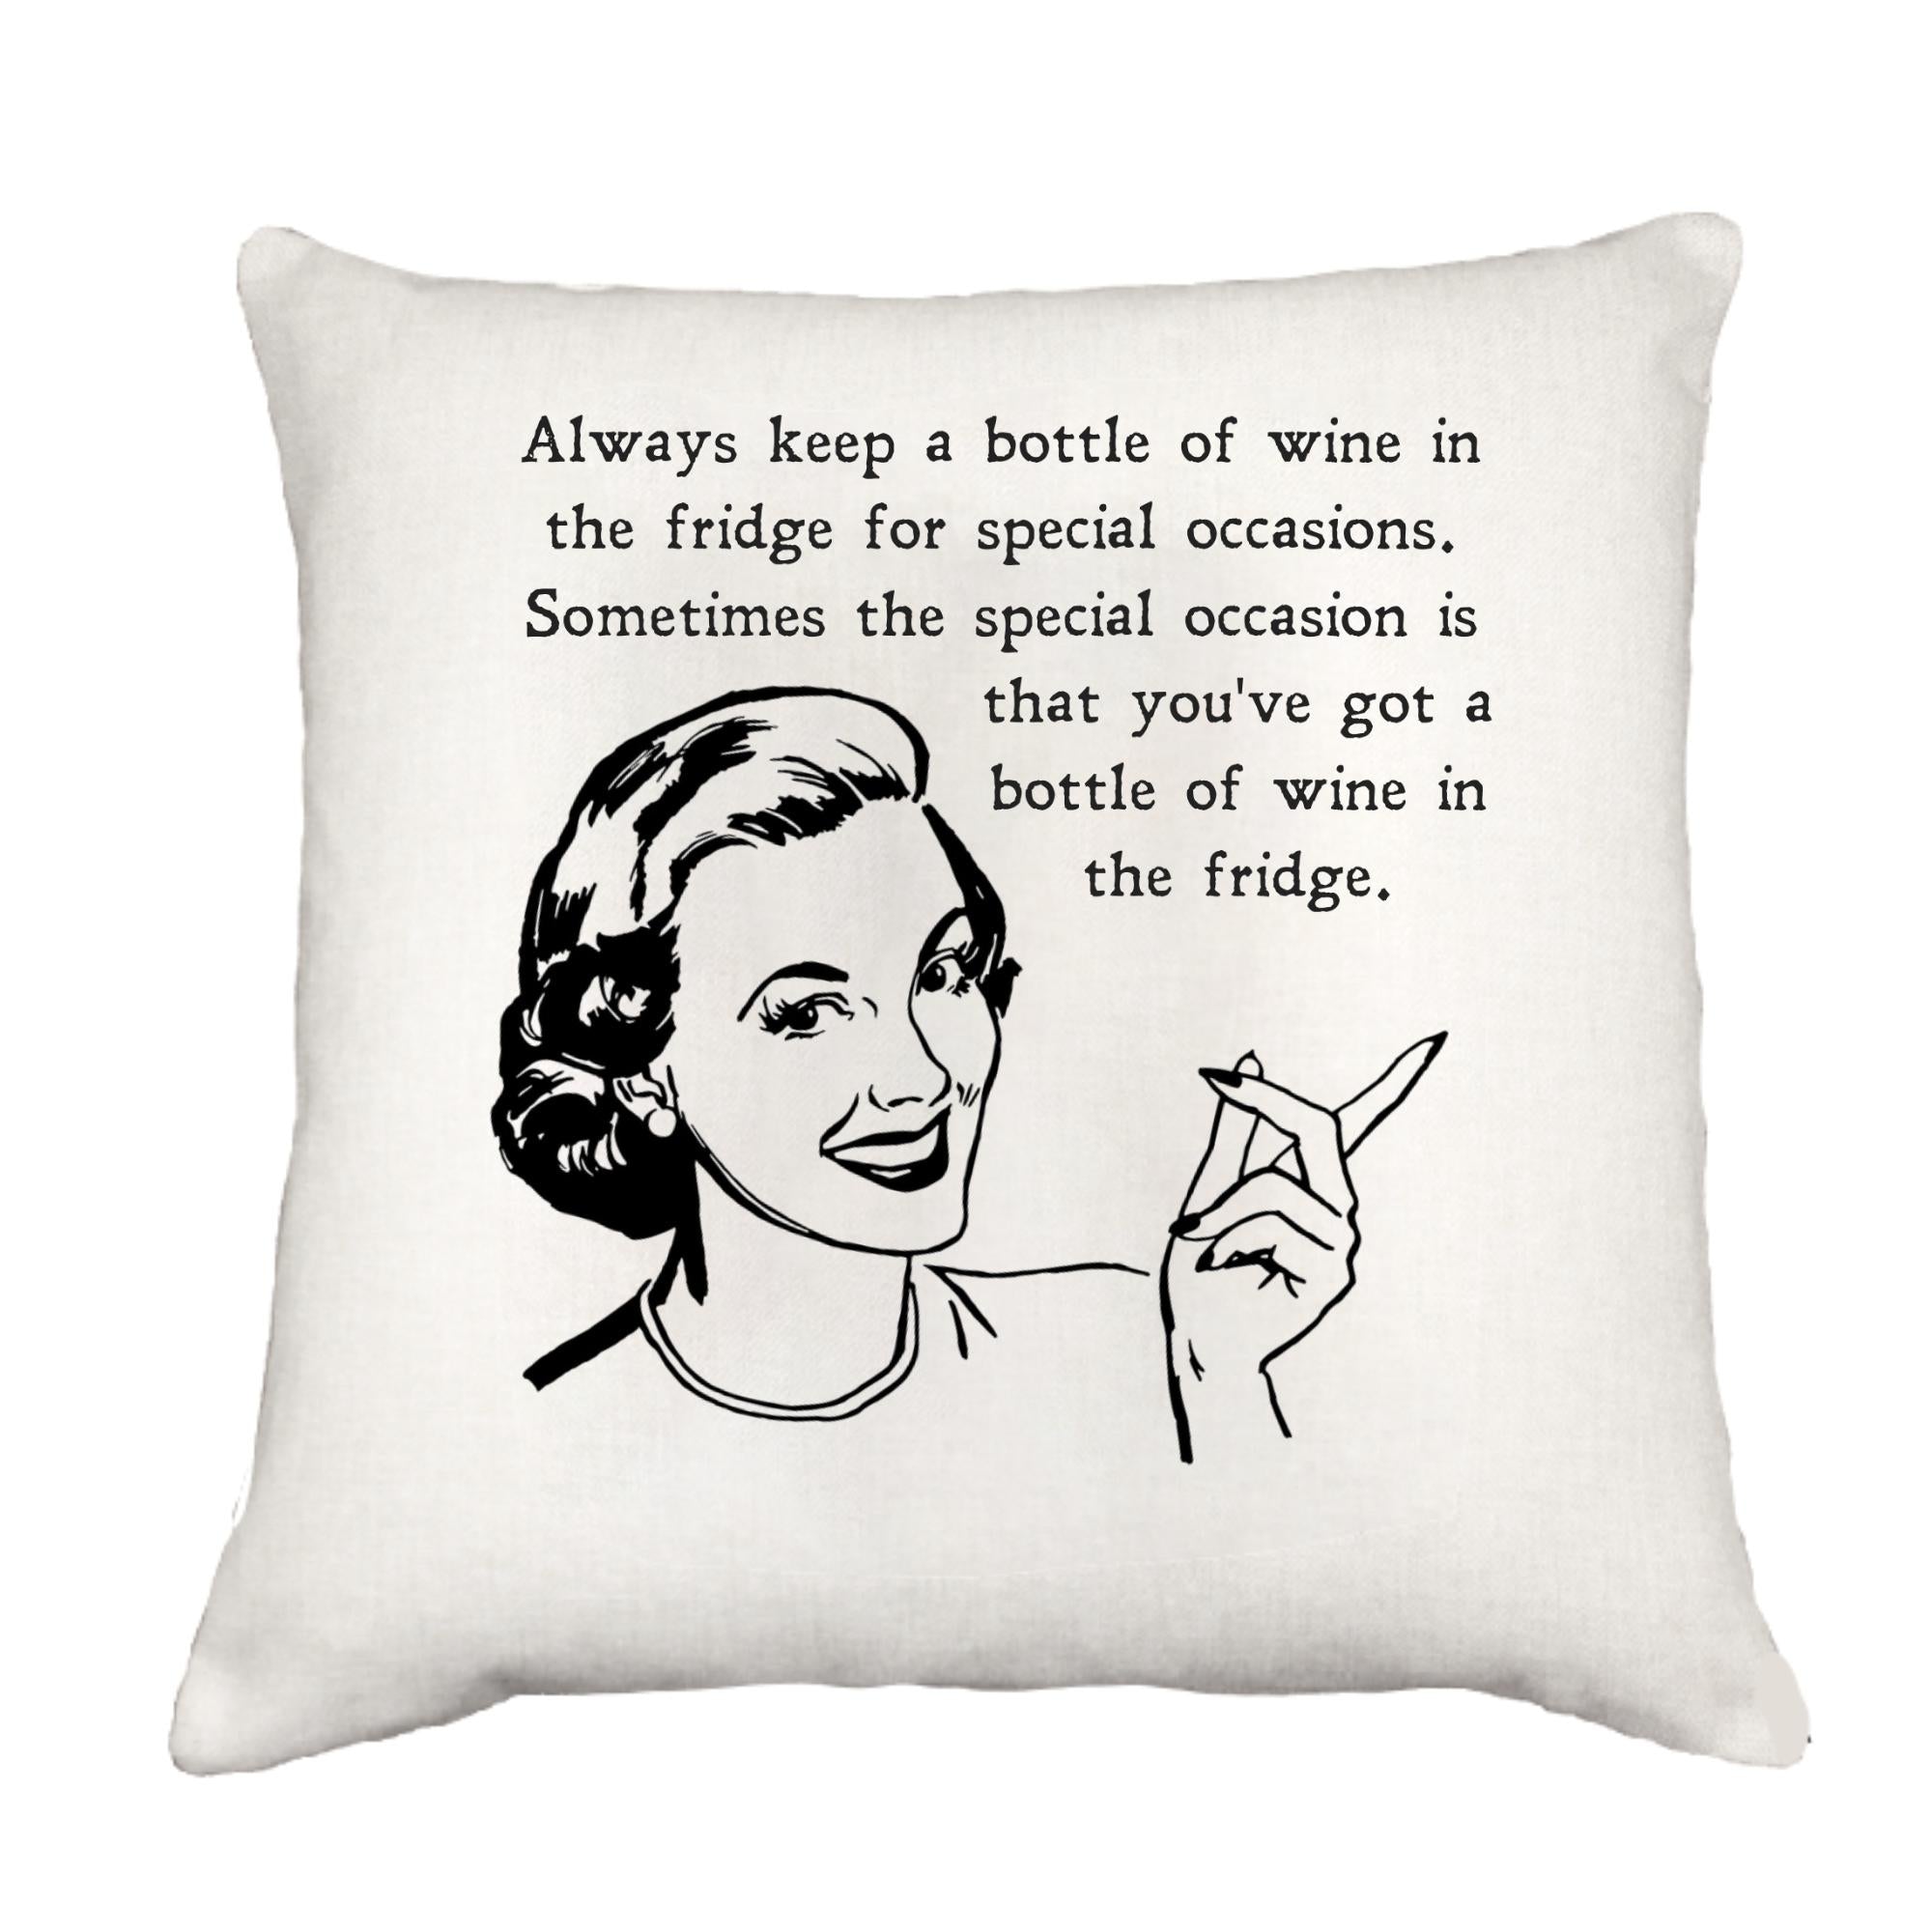 Wine in Fridge Cottage Pillow Throw/Decorative Pillow - Southern Sisters